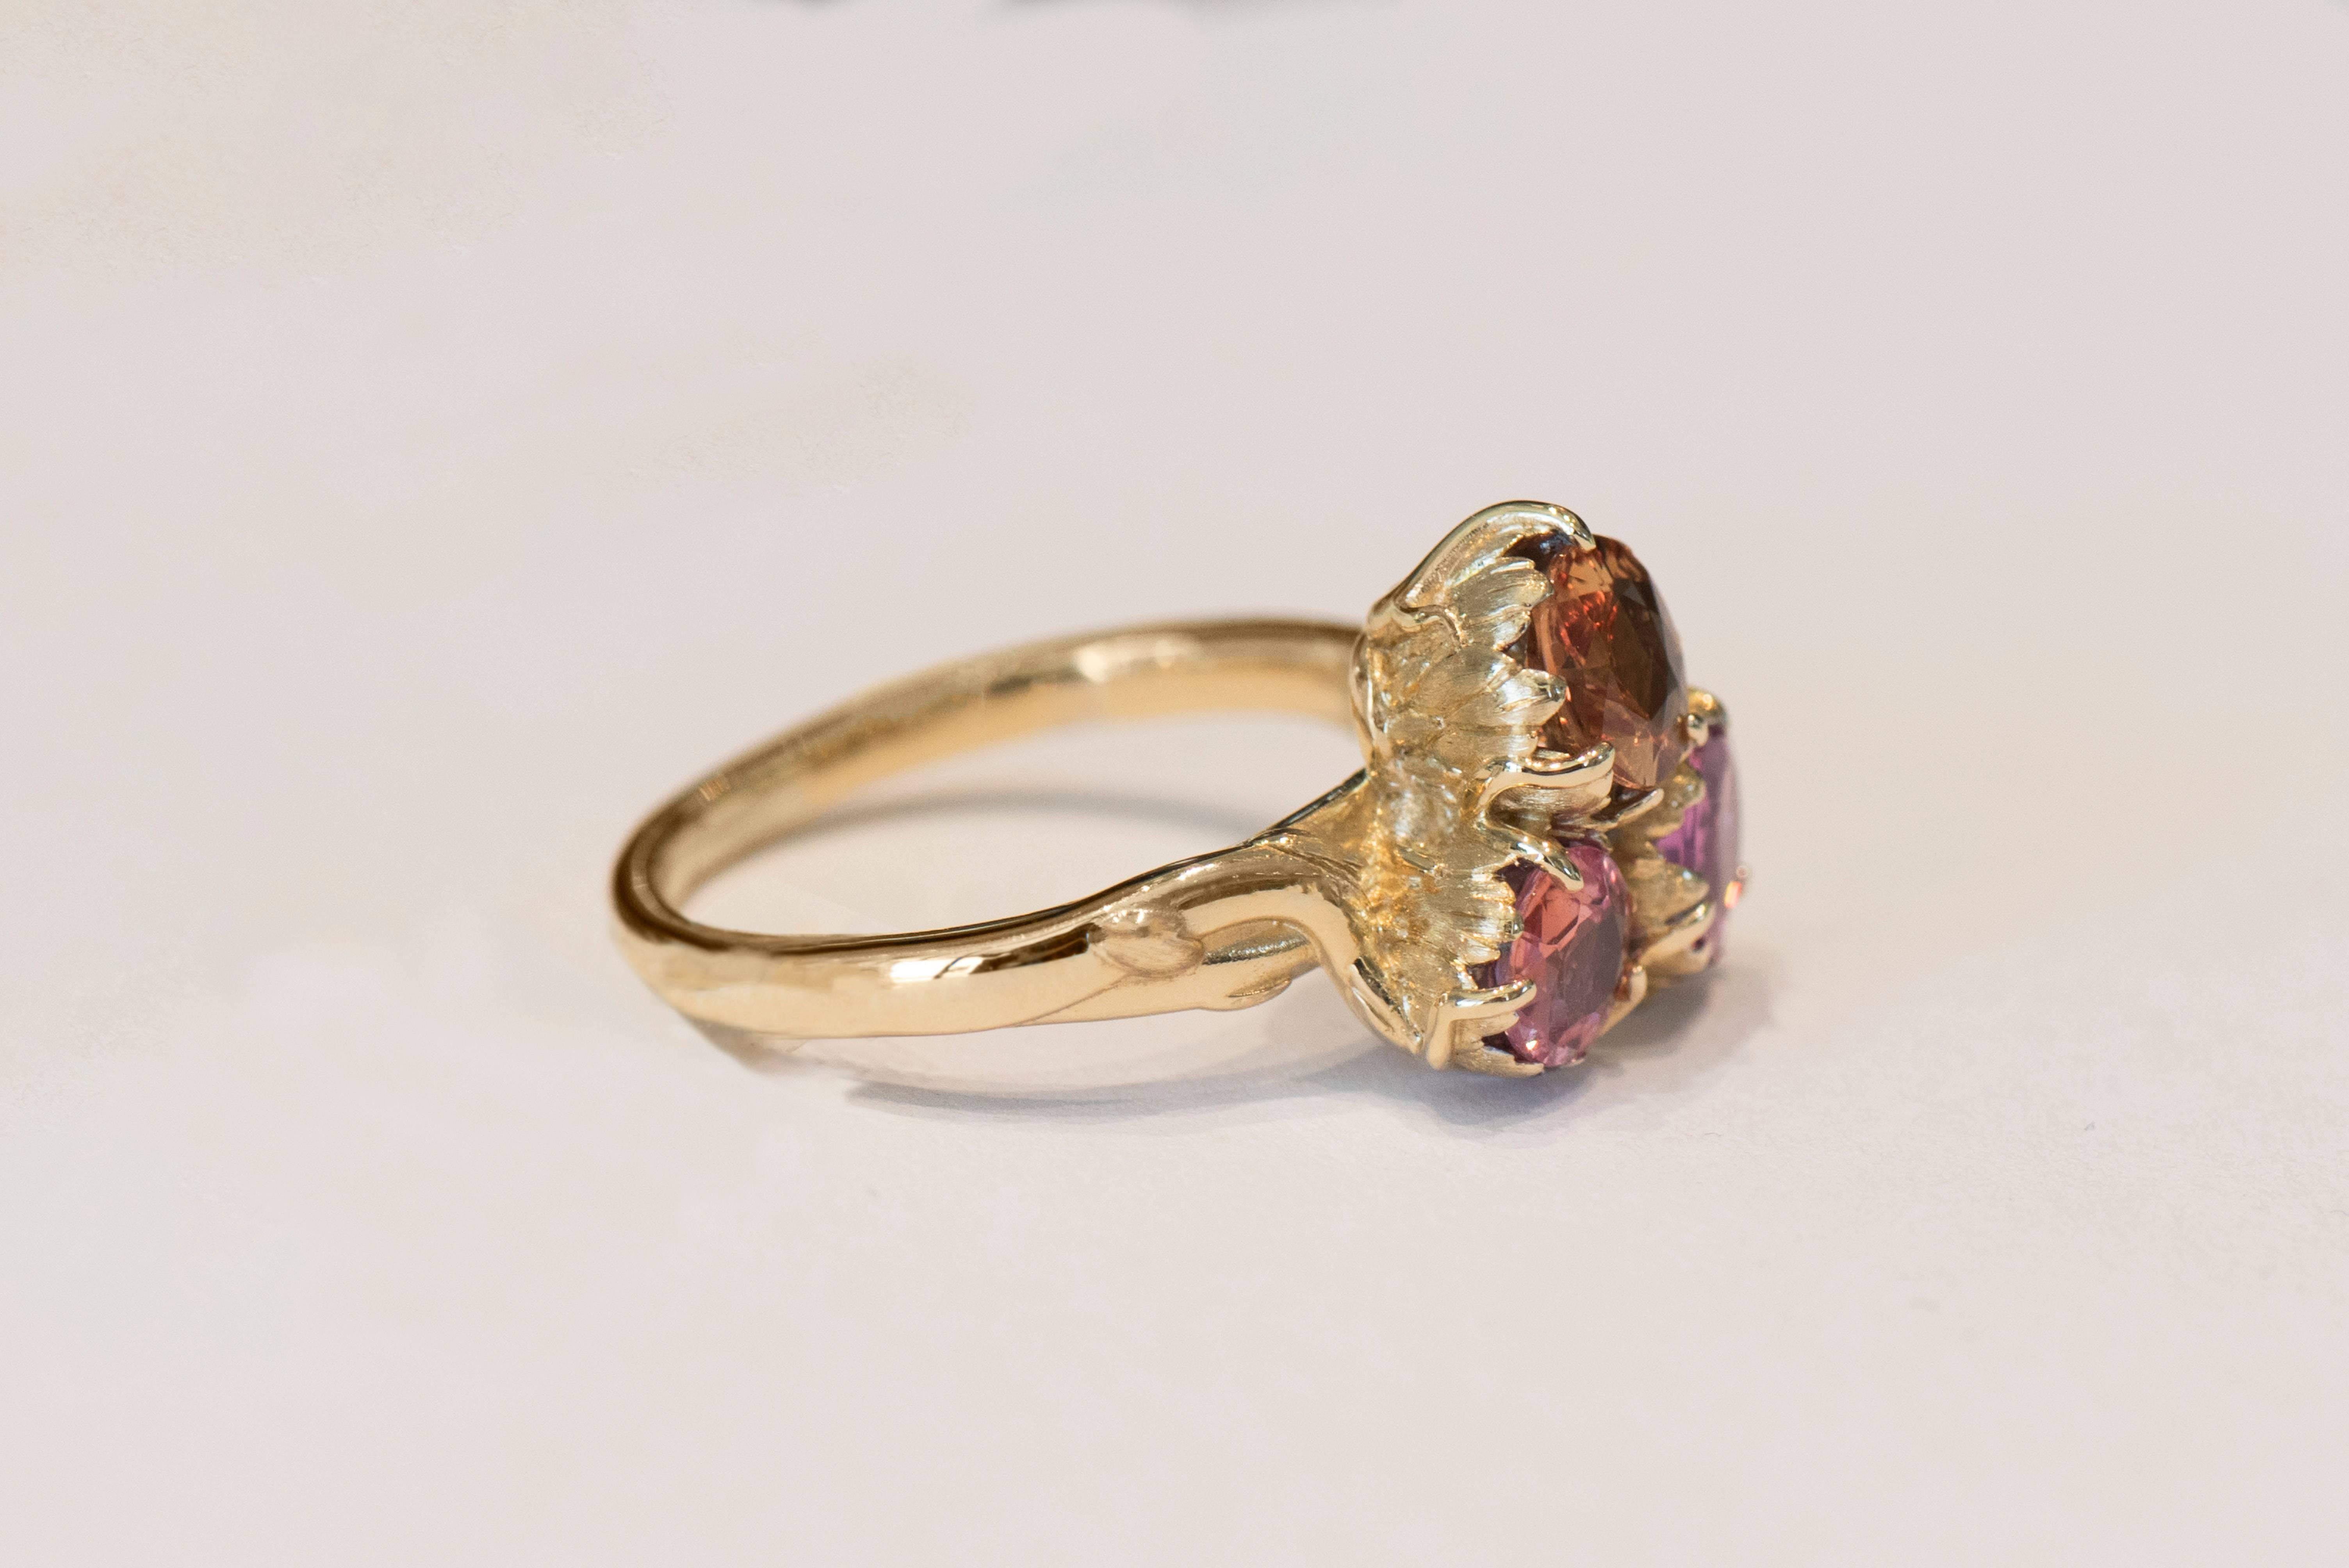 1.90 Carat TW Fancy Sapphire Trio with Amber, Pink, and Padparadscha Colors

Inspired by nature, with hand carved flowing vines and flower petals, this stunning 14 karat yellow gold ring is truly unique! Amber, pink, and padparadscha colored